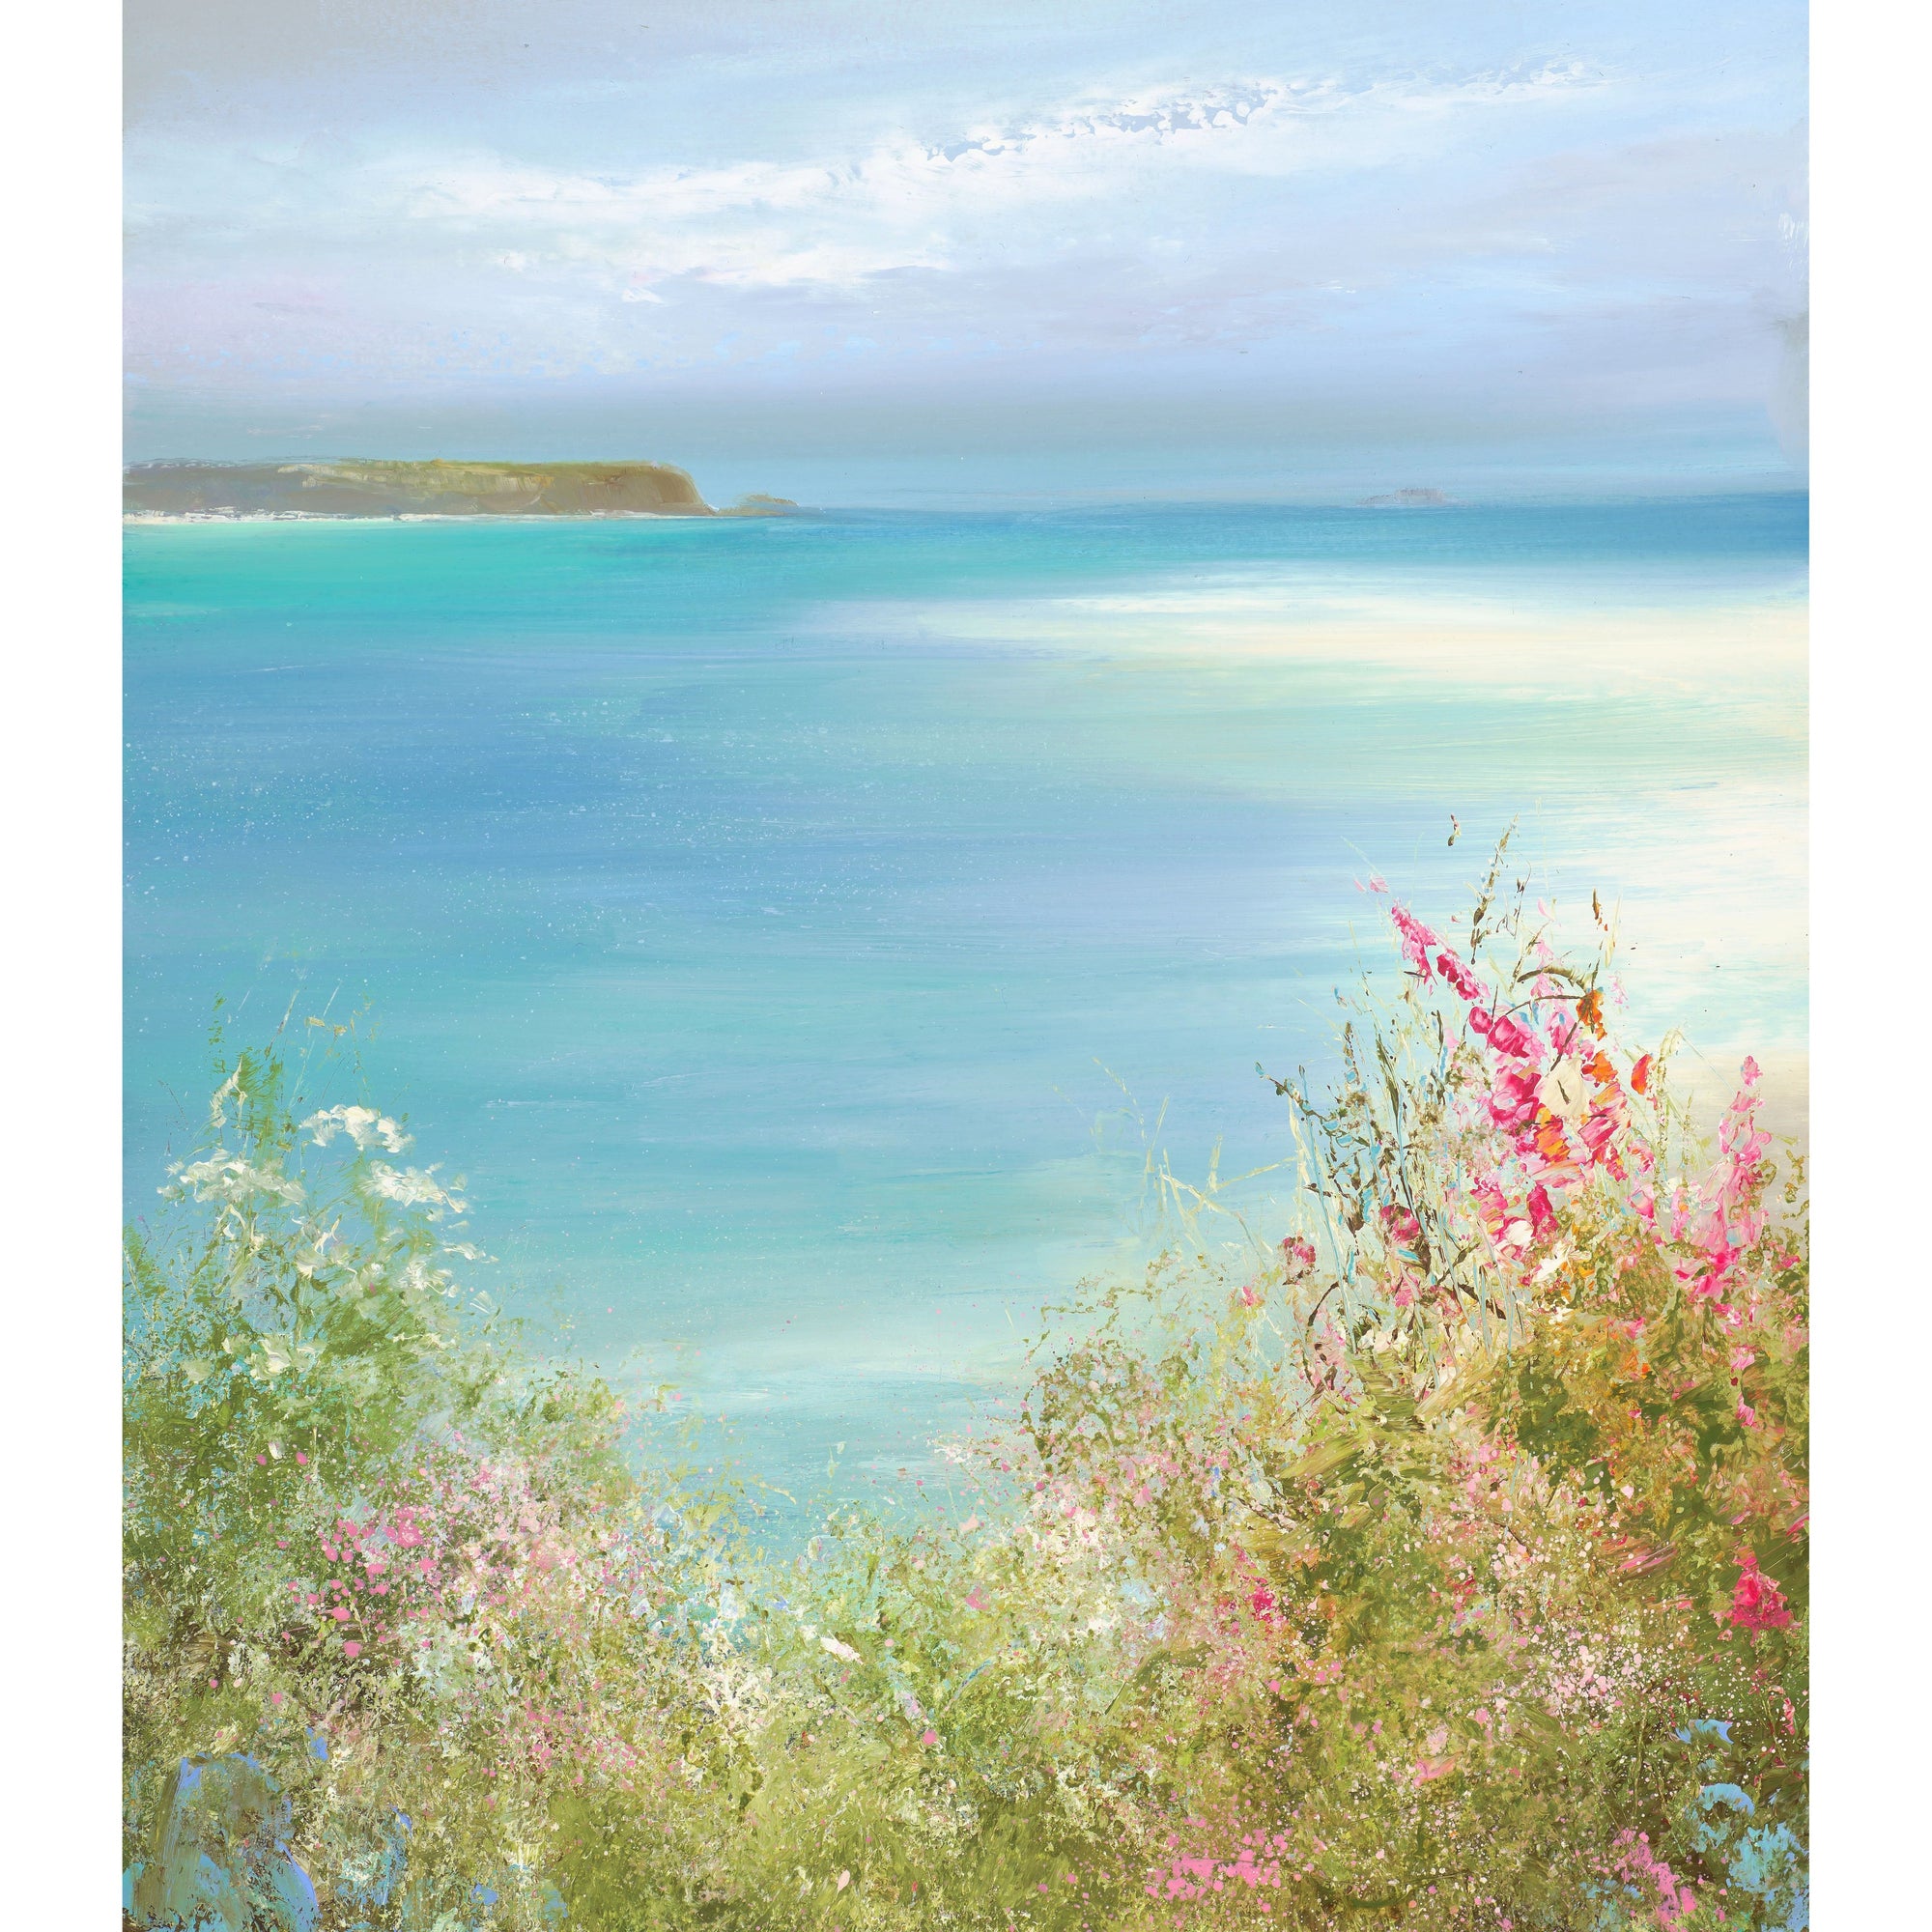 'Summer Flowers At Daymer Bay' oil on paper original by Amanda Hoskin, available at Padstow Gallery, Cornwall